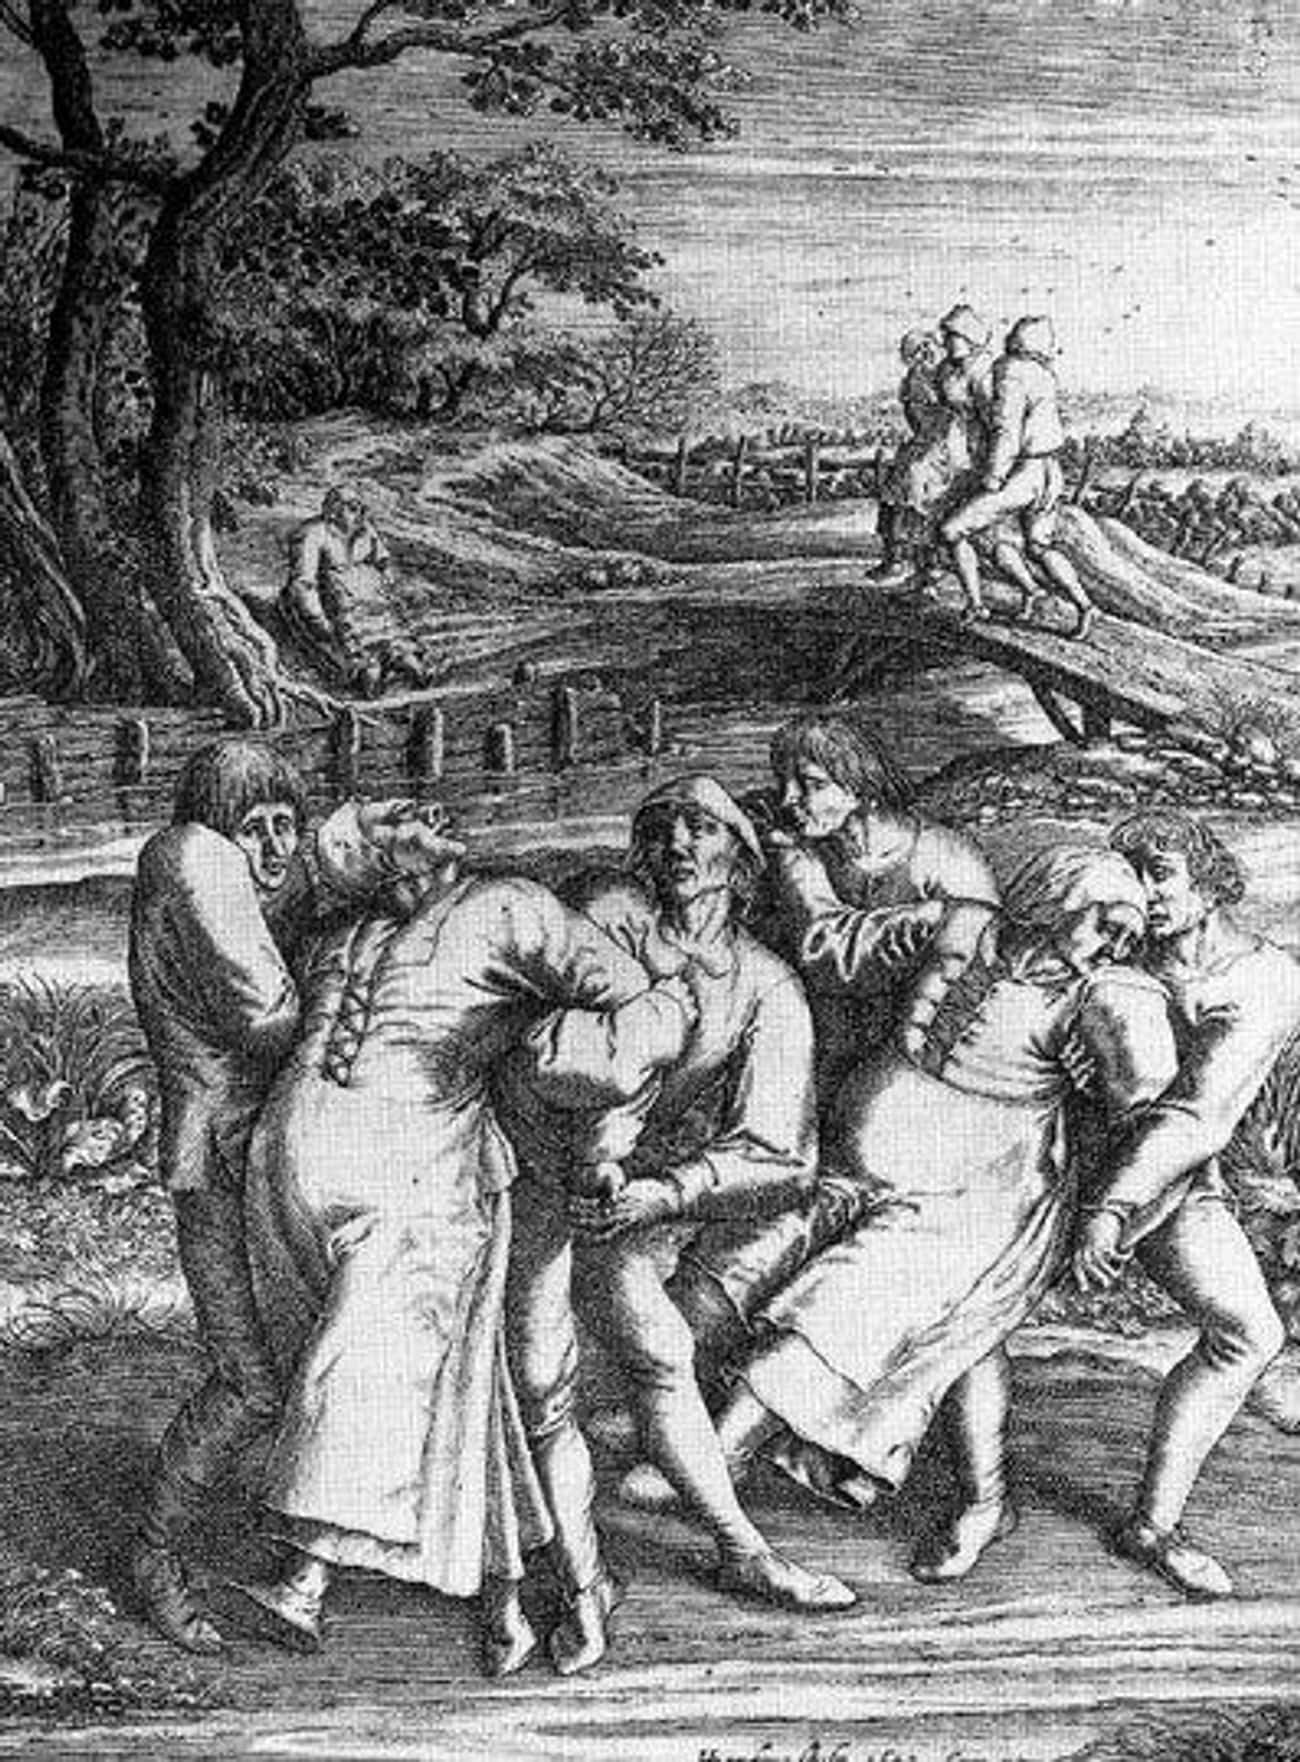 A German Housewife Was The First To Start Dancing In 1518, And She Didn’t Stop